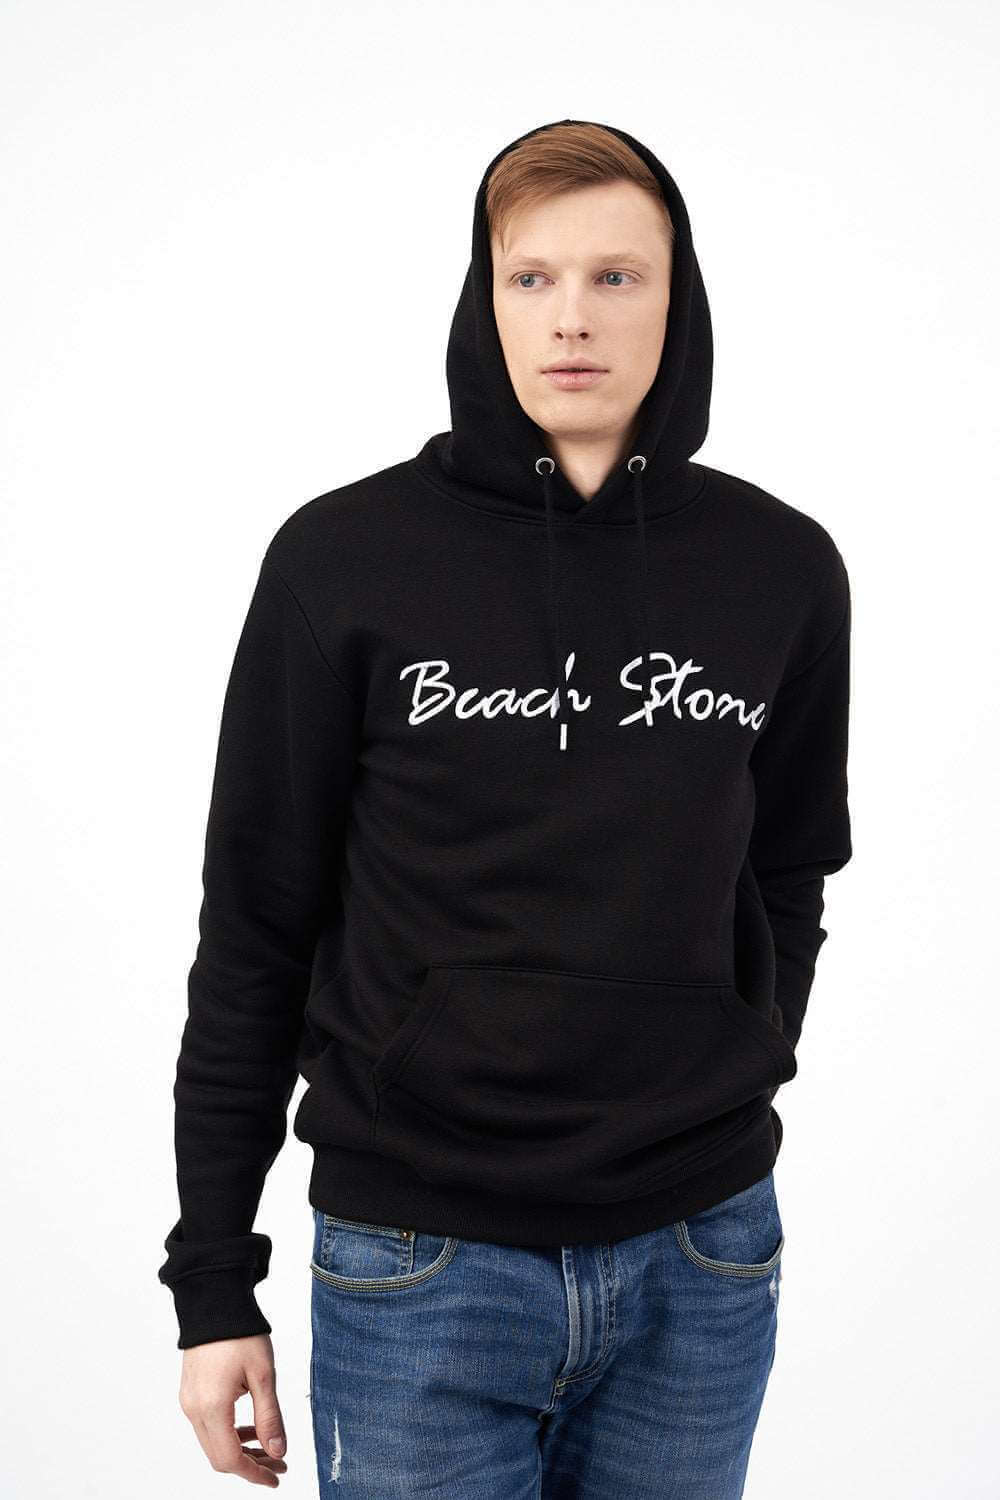 Men's Hoodie with Beach Stone Embroidery and Adjustable Drawstring